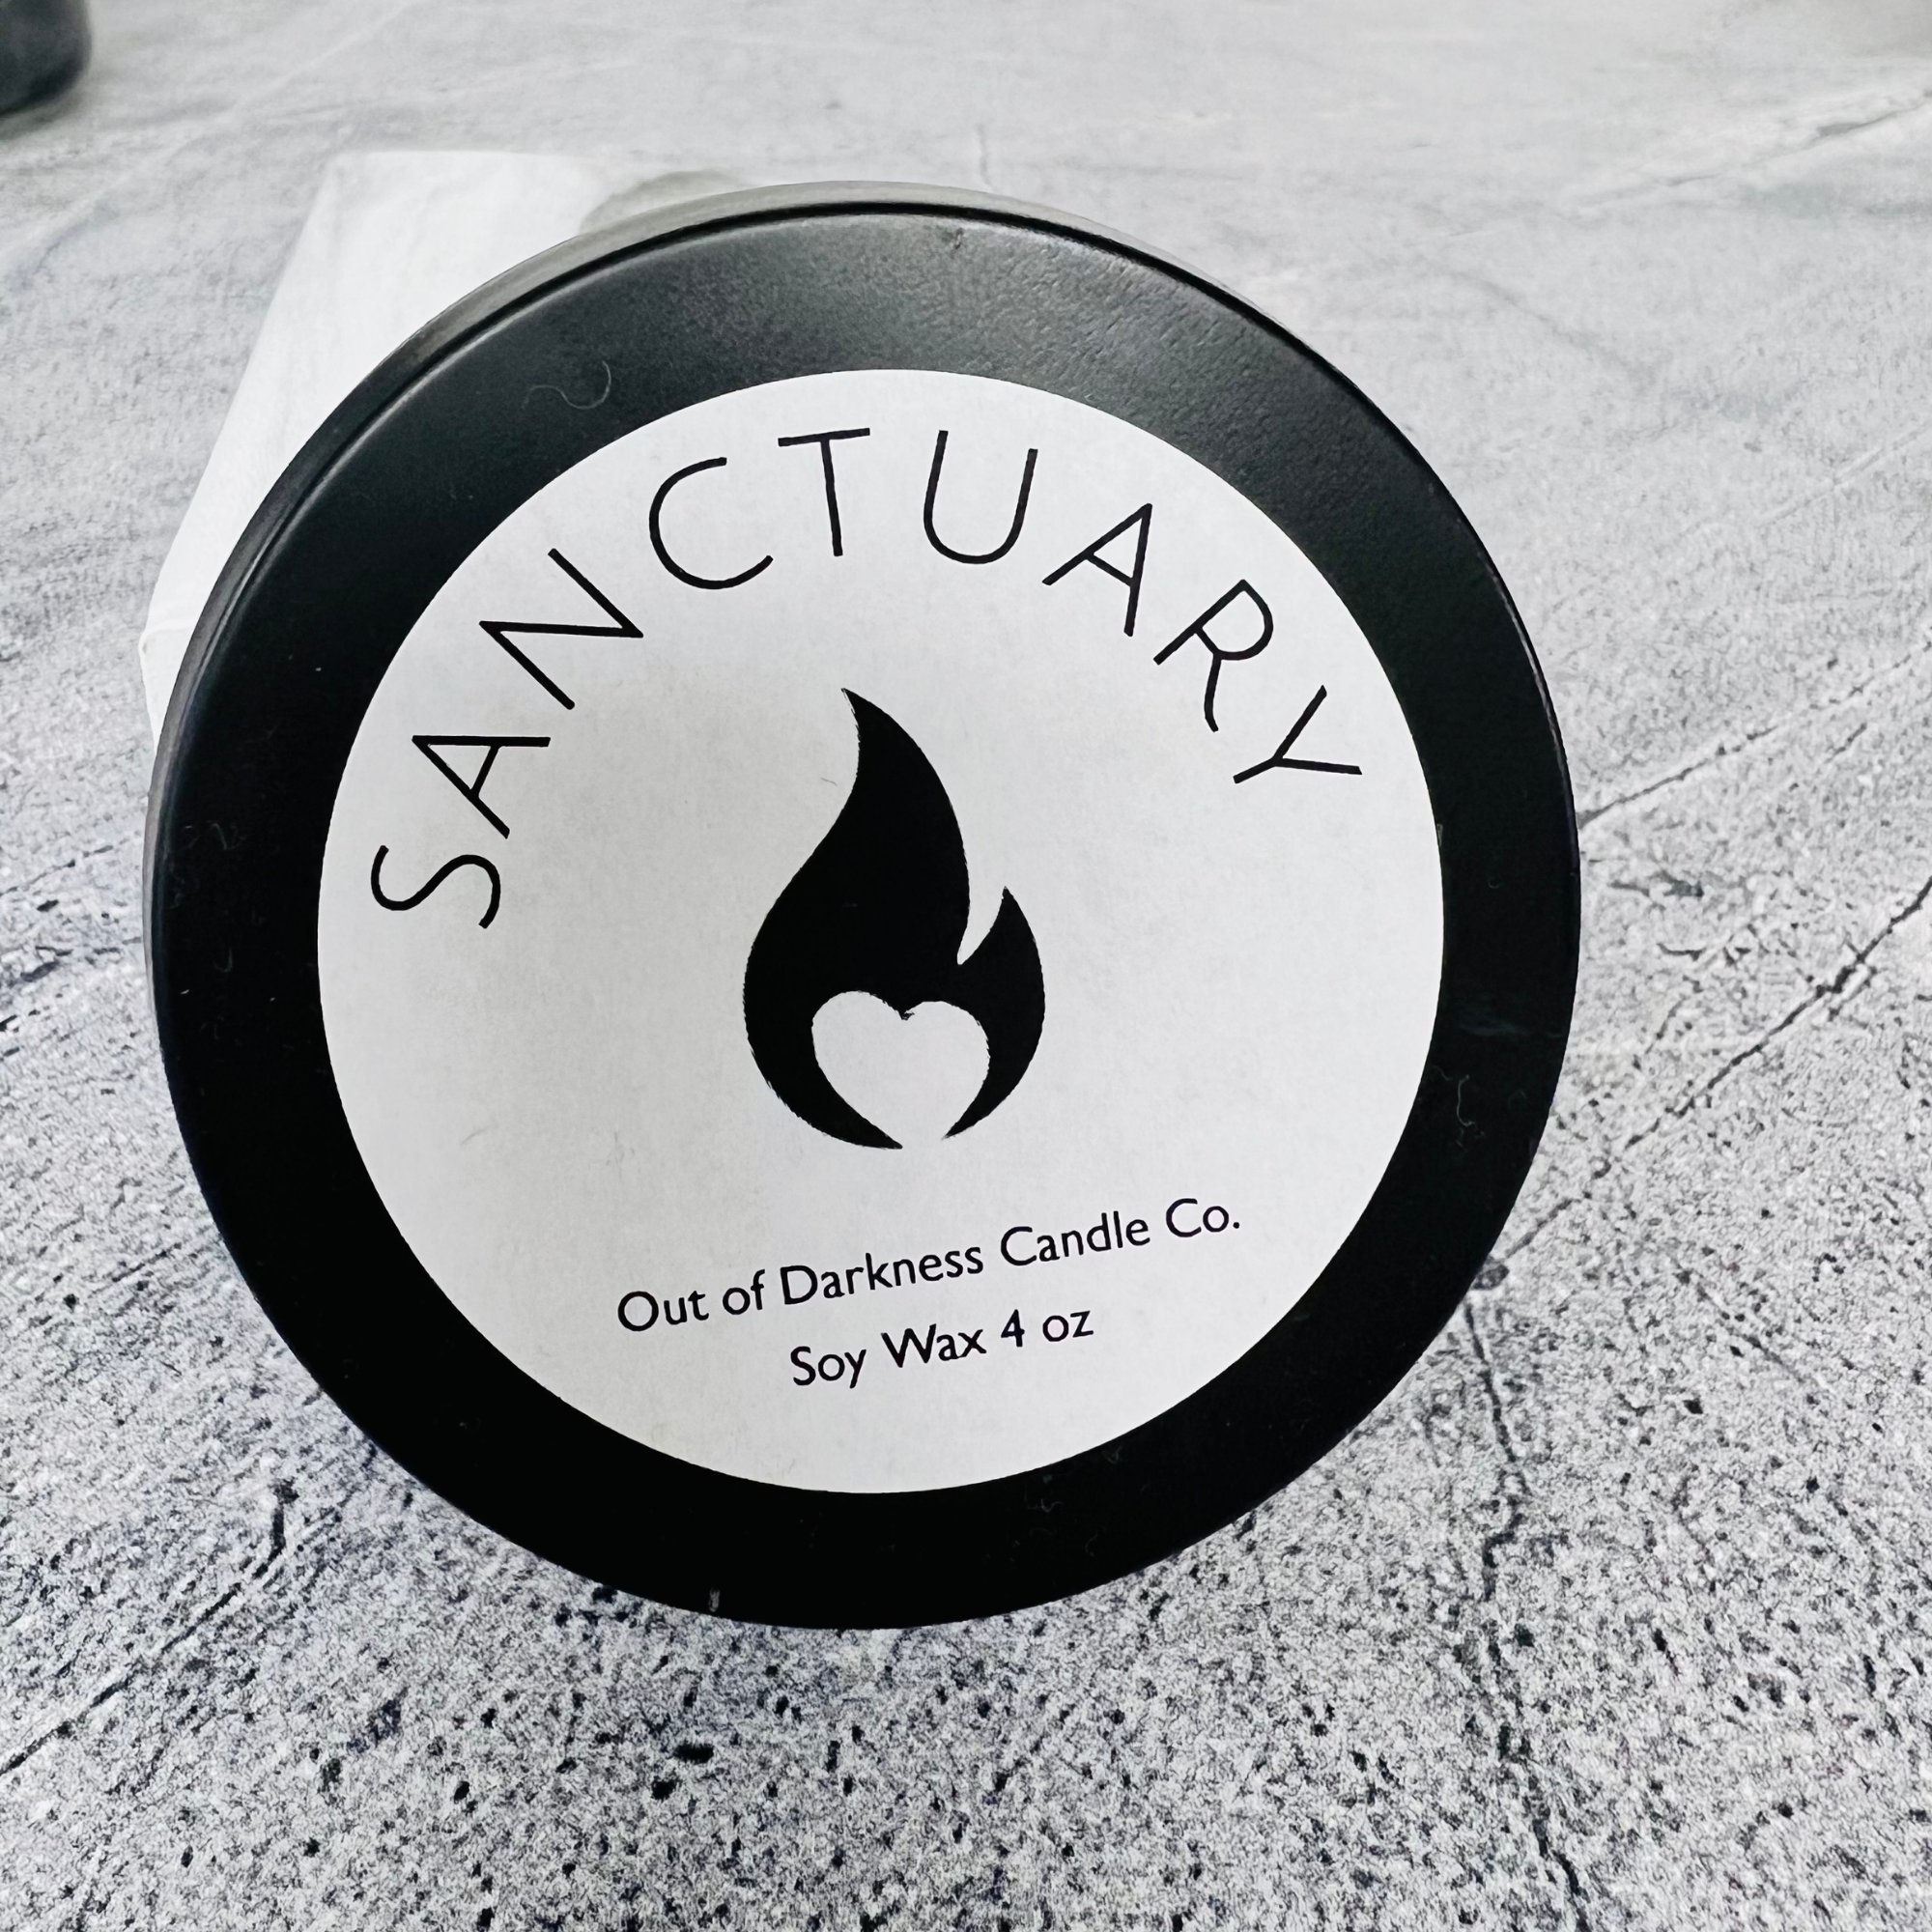 black candle tin with white label - black flame logo in the middle says sanctuary above the flame and below the flame says out of darkness candle co soy wax 4 oz